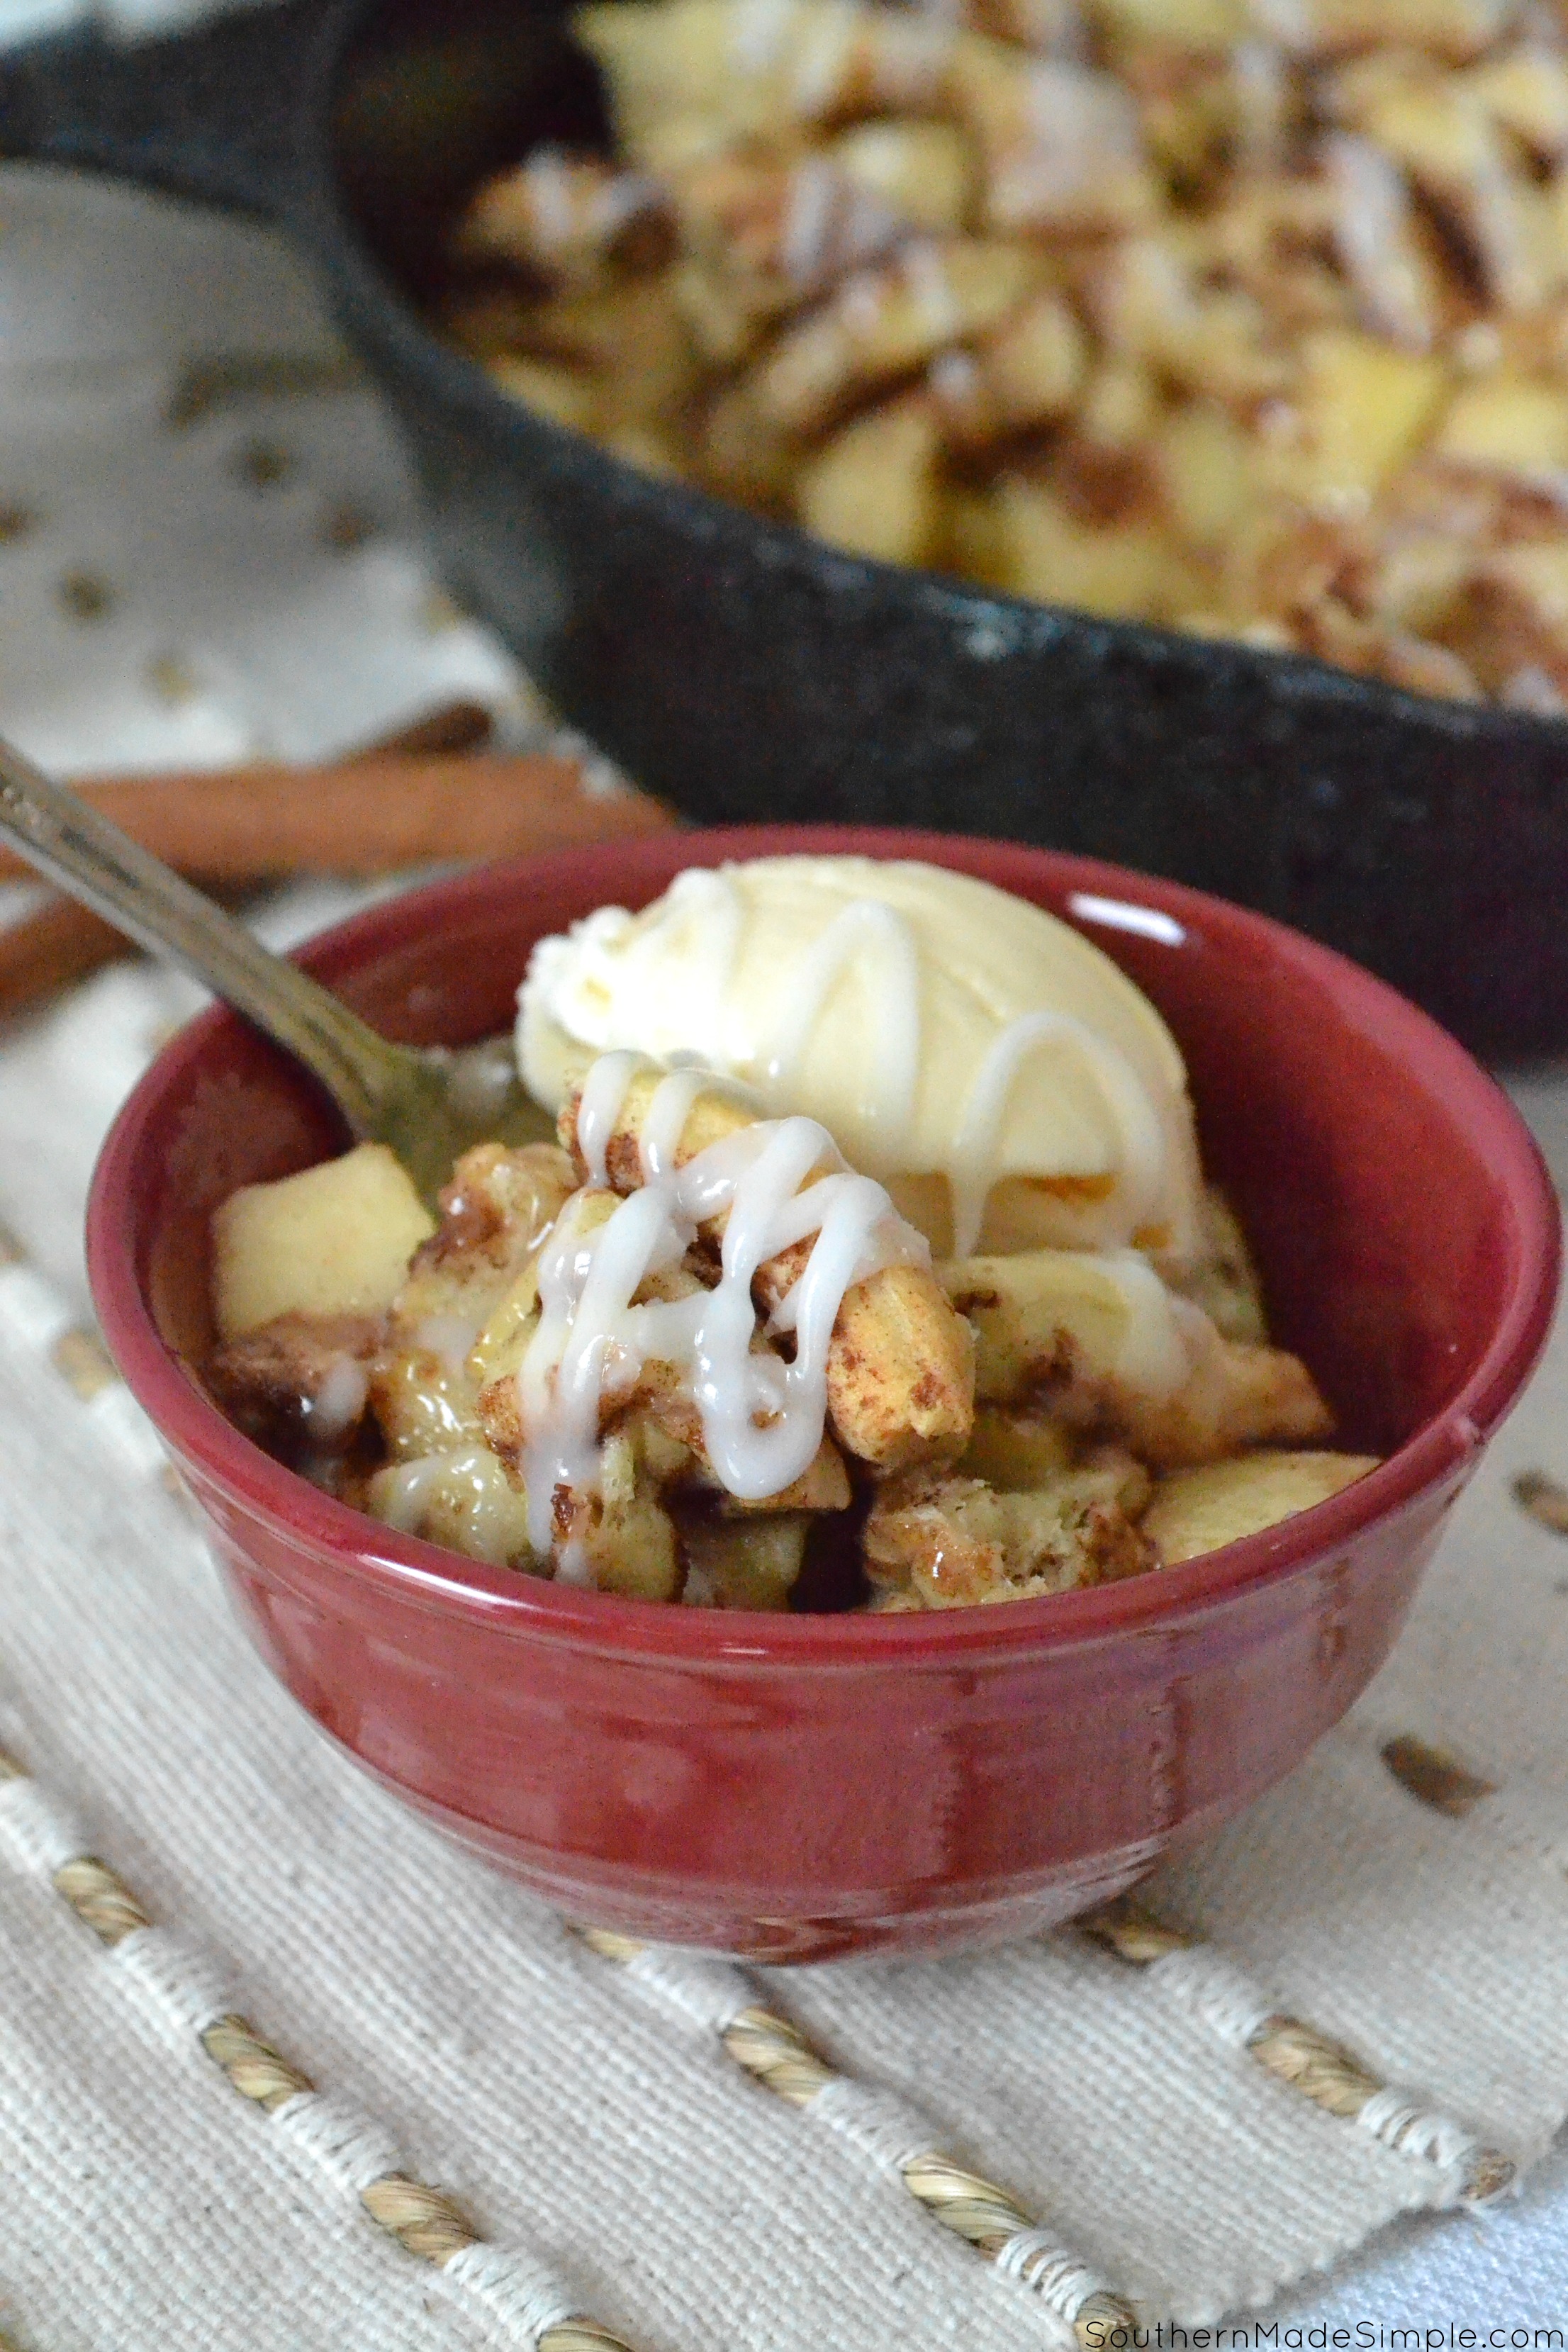 This Cinnamon Roll Apple Cobbler captures the flavors of fall perfectly! Add a scoop of ice cream and you're in for a real treat! #Apples #Cinnamonrolls #Cobbler